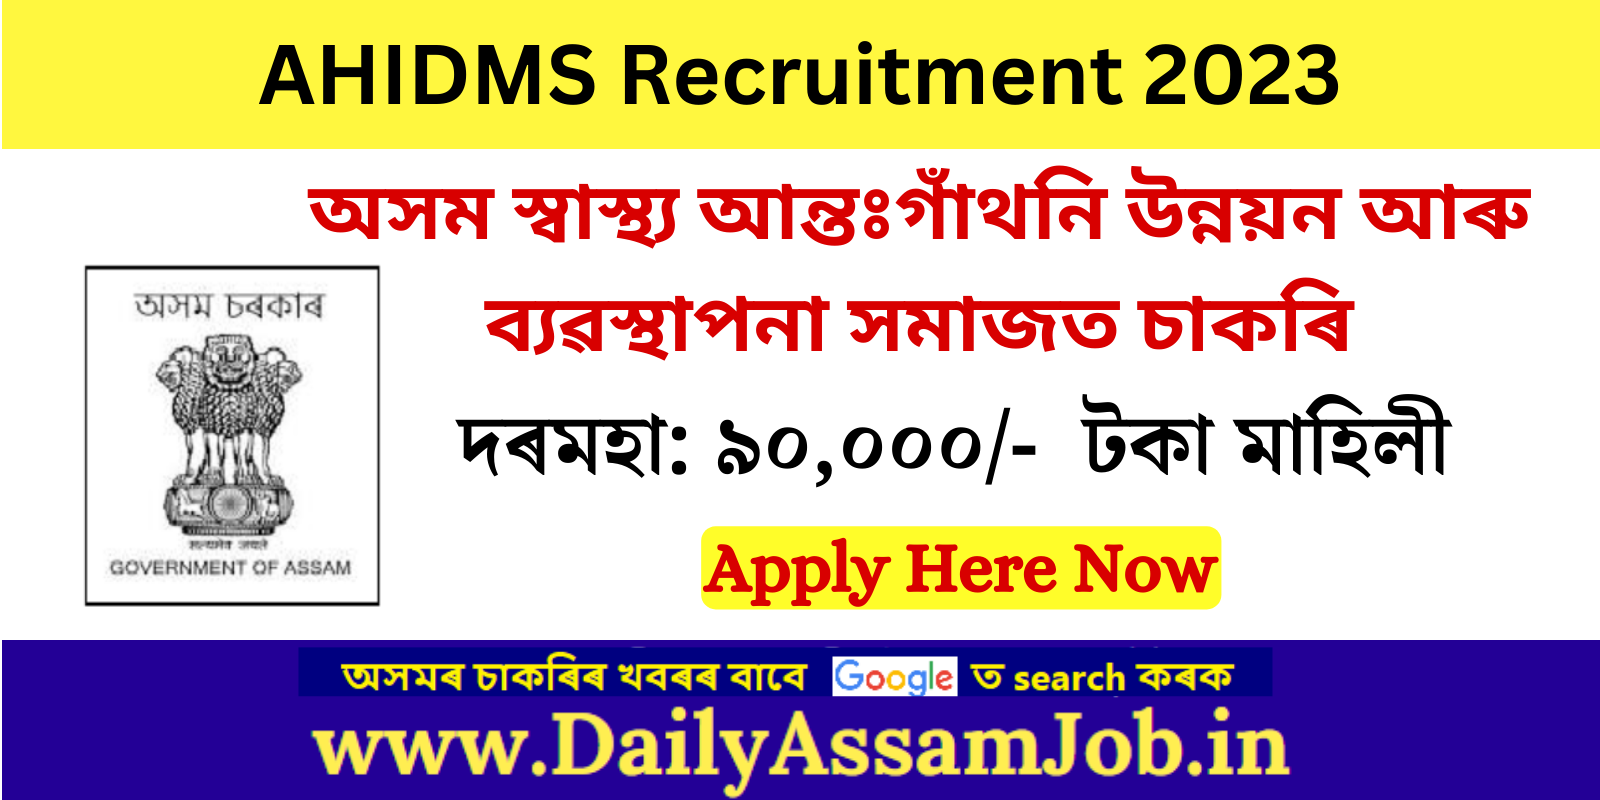 Assam Career :: AHIDMS Recruitment for 2 Specialist Vacancy